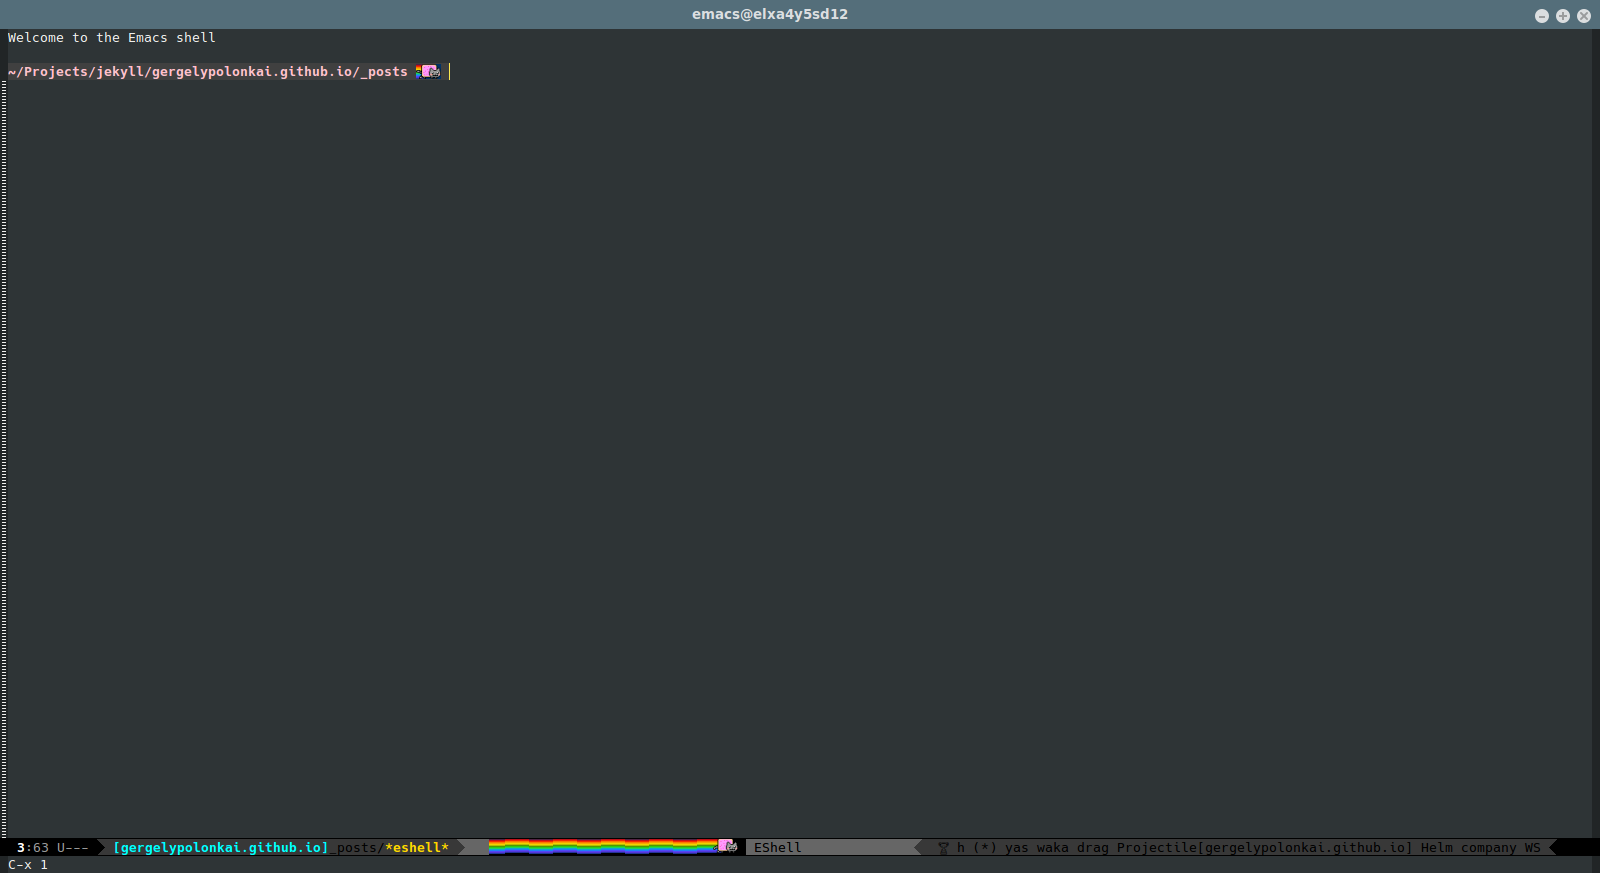 eshell prompt with a Nyan cat